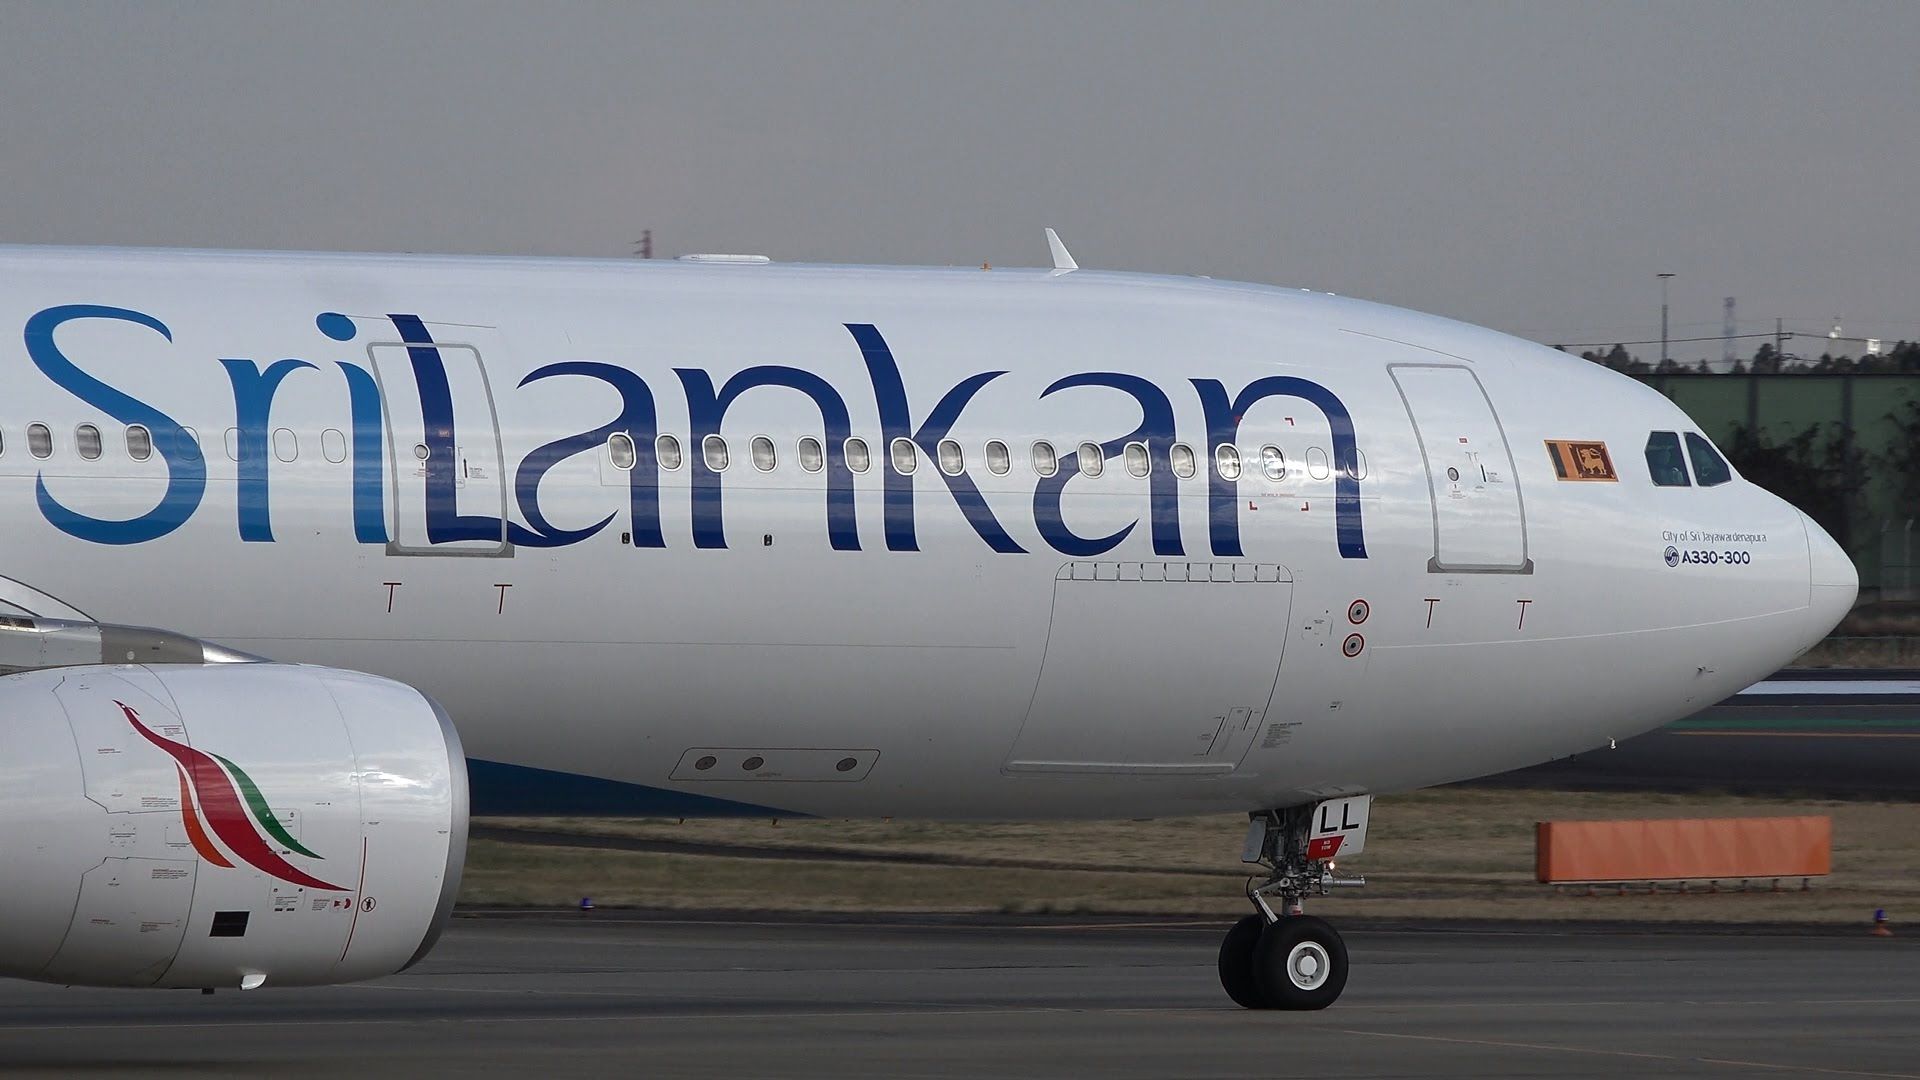 SriLankan Airlines receives prestigious Four Star rating by Airline Passenger Experience Association